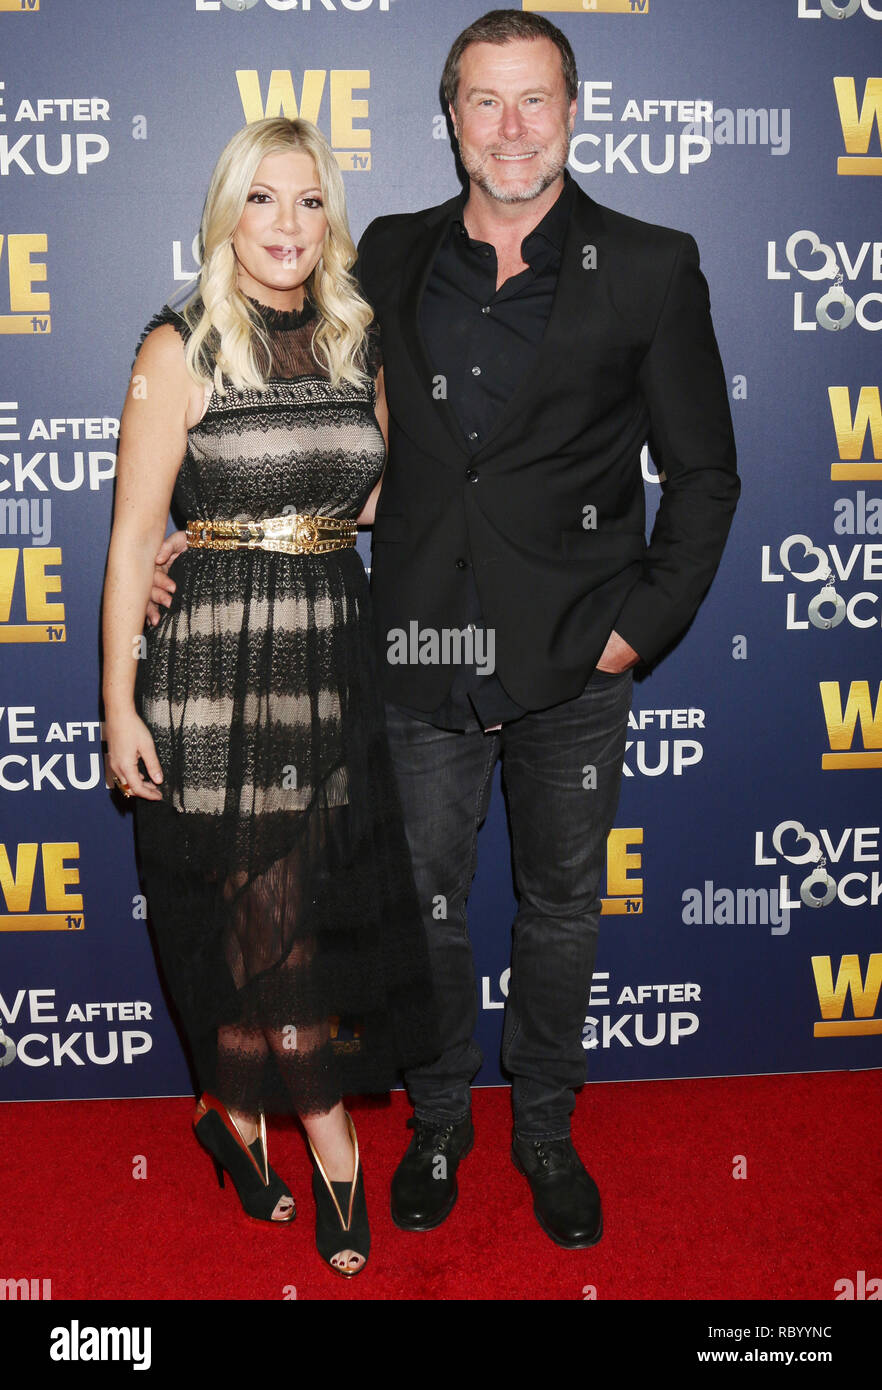 WE TV celebrates the return of 'Love After Lockup' with panel, 'Real Love: Relationship Reality TV's Past, Present & Future,' at The Paley Center for Media  Featuring: Tori Spelling, Dean McDermott Where: Beverly Hills, California, United States When: 12 Dec 2018 Credit: Nicky Nelson/WENN.com Stock Photo